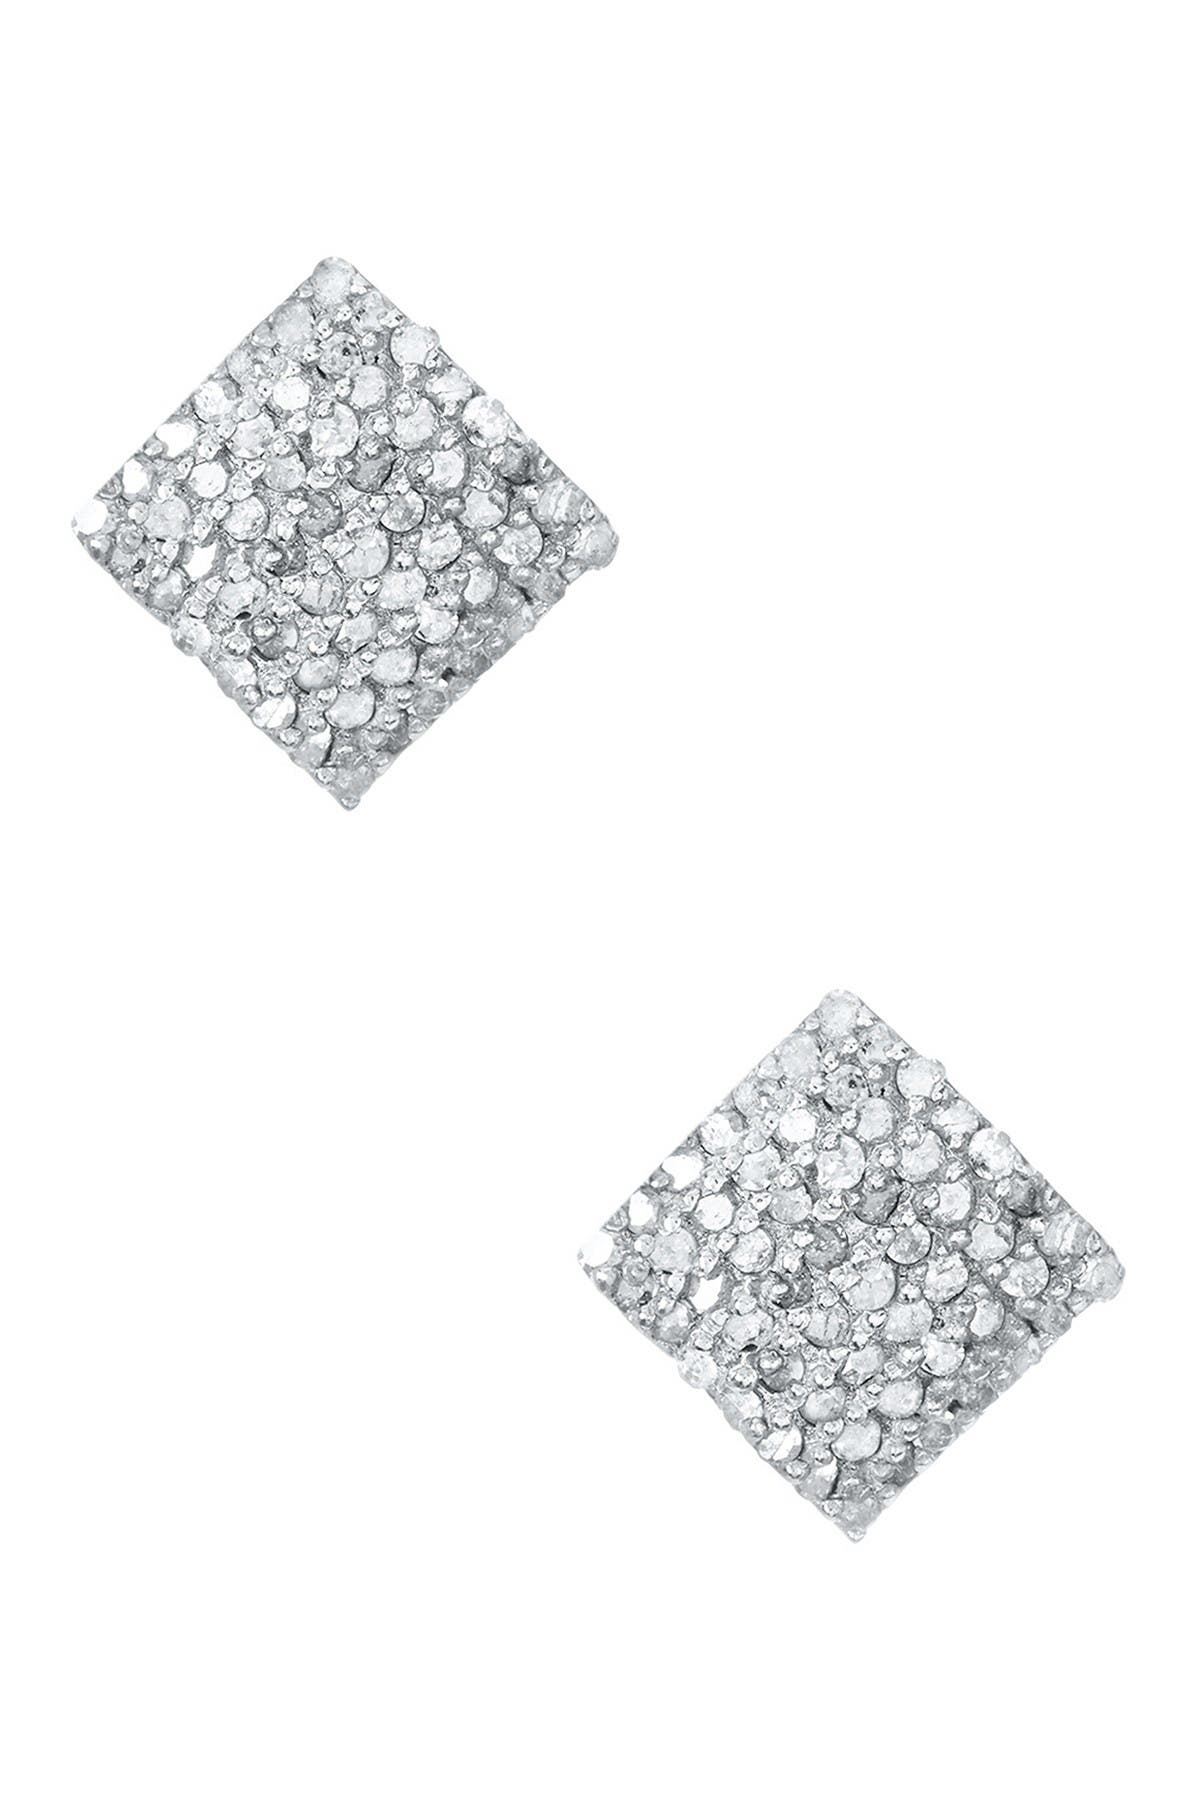 Adornia Fine Ethel Rhodium Plated Sterling Silver Pave Diamond Square Stud Earrings